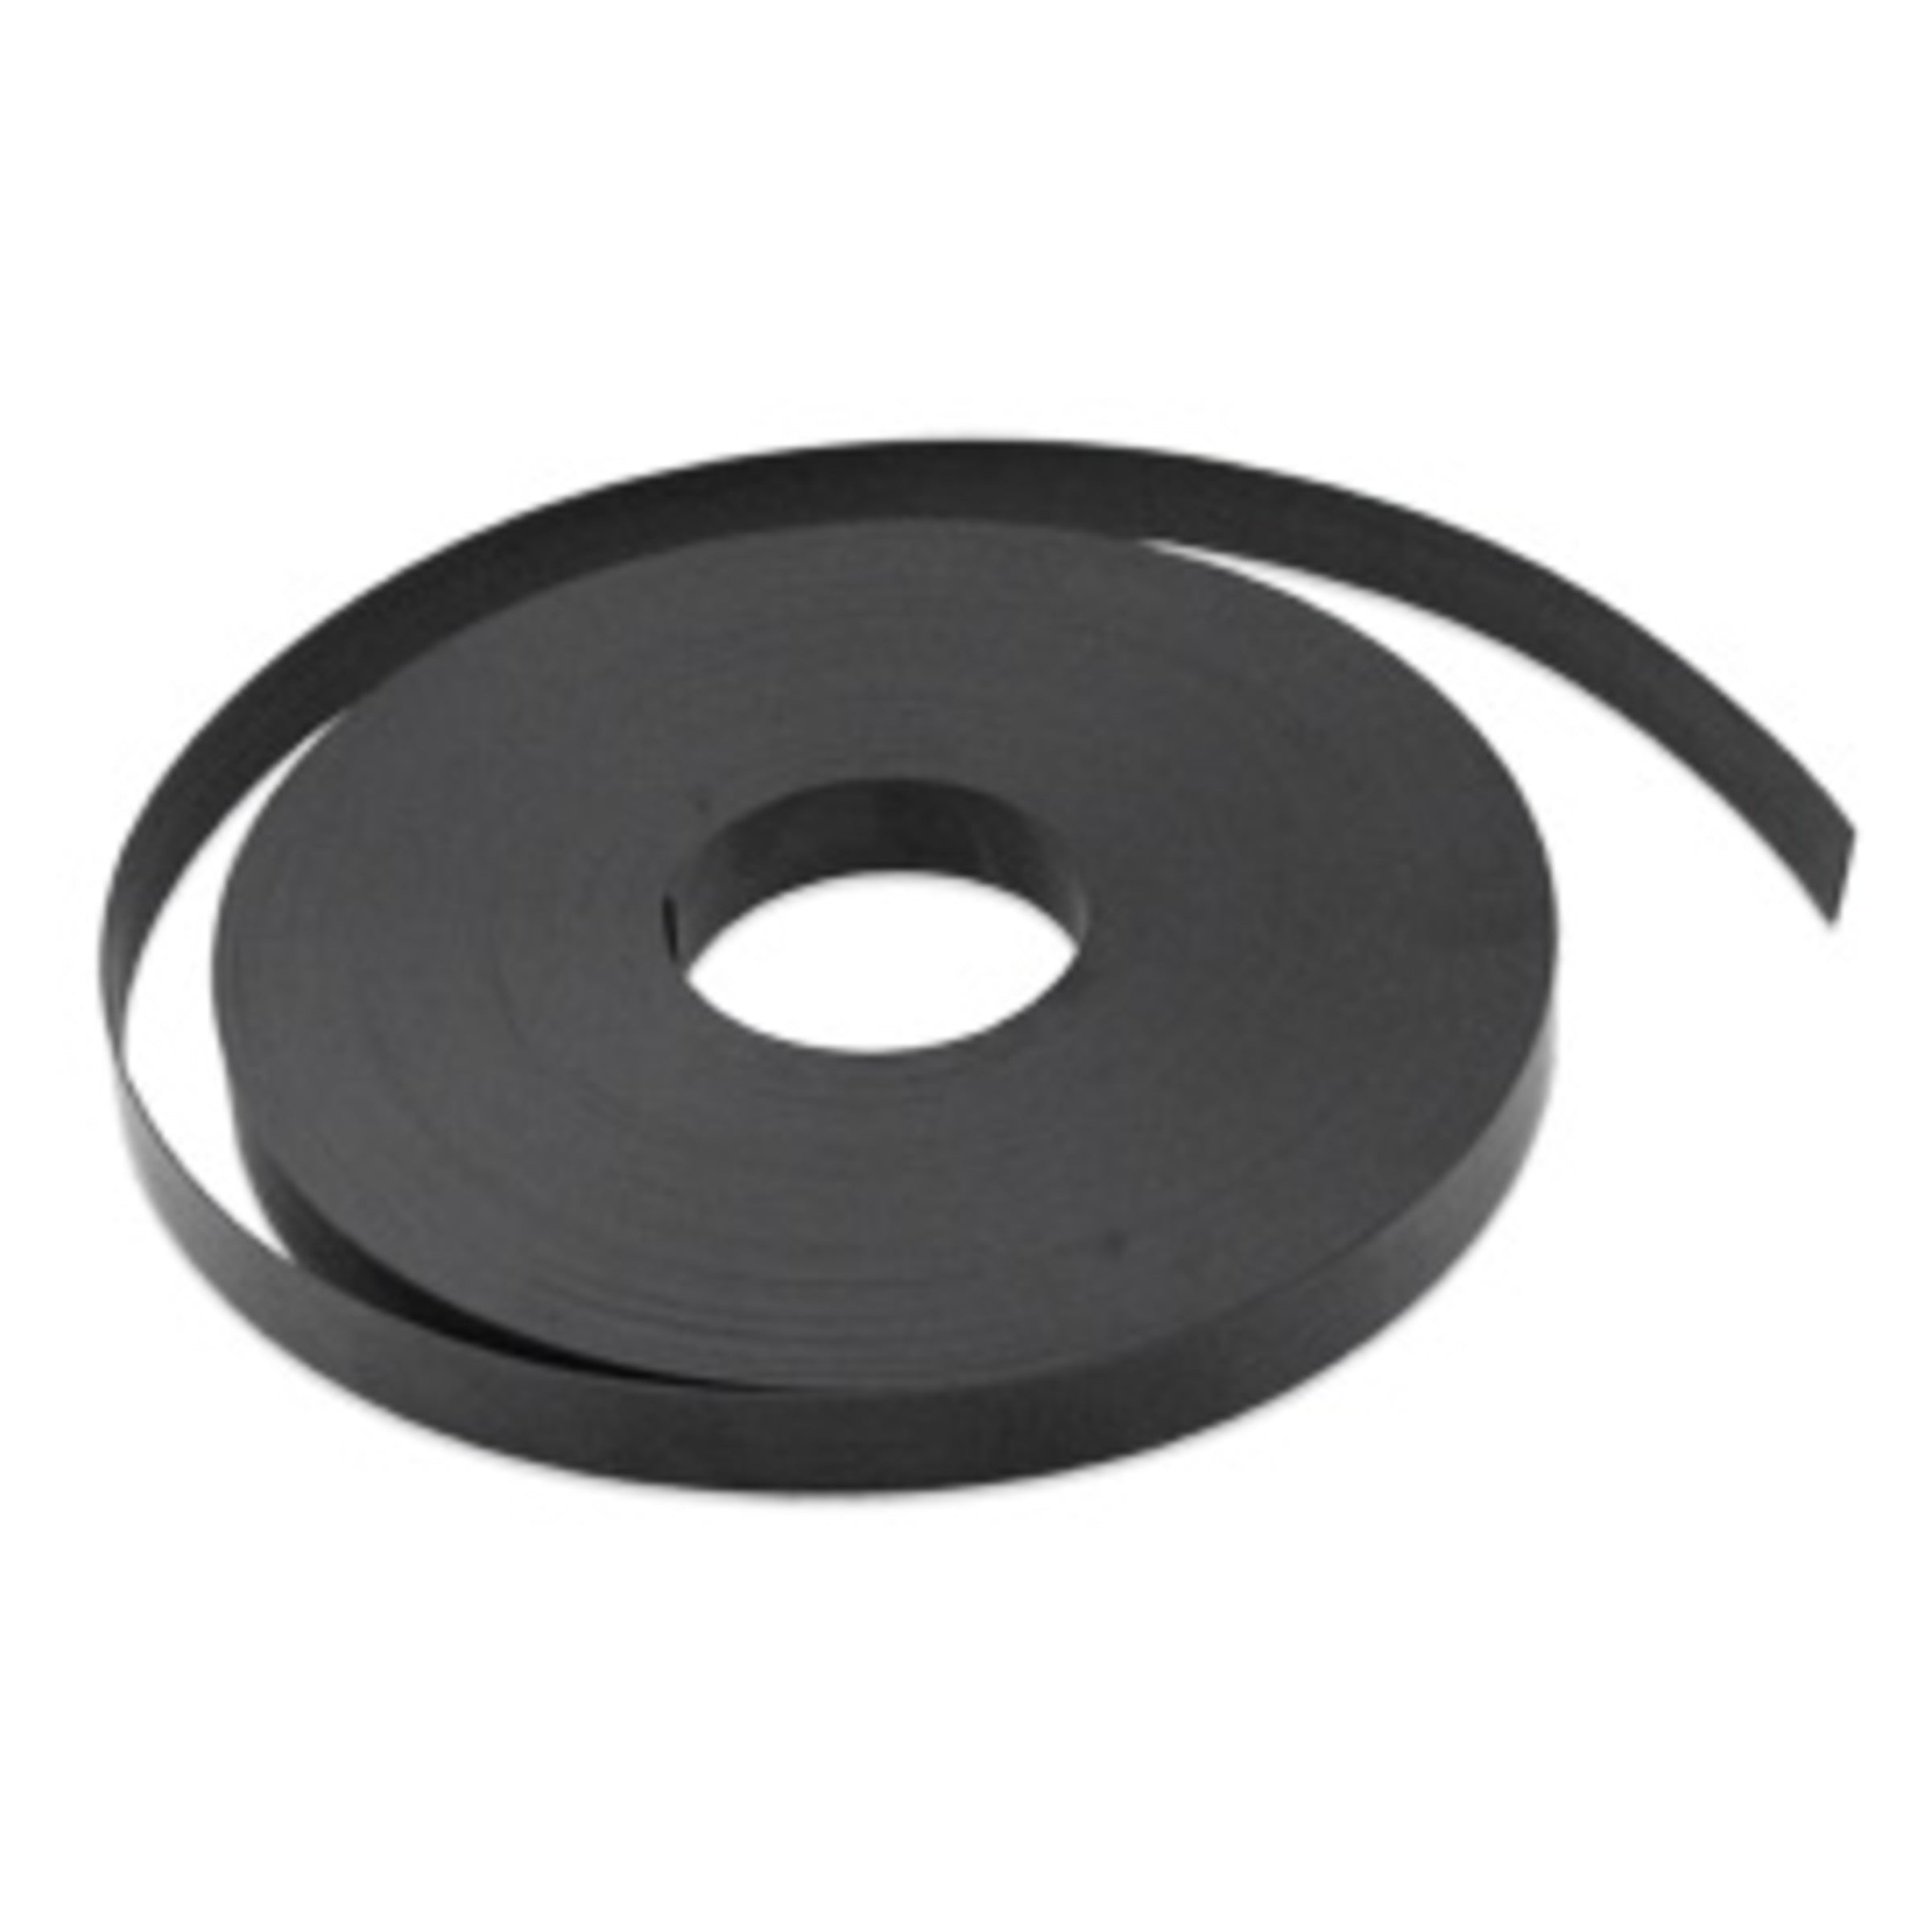 The Magnet Source Flexible Magnetic Strips with Adhesive 1 in. x 10 ft.  PACK OF 2